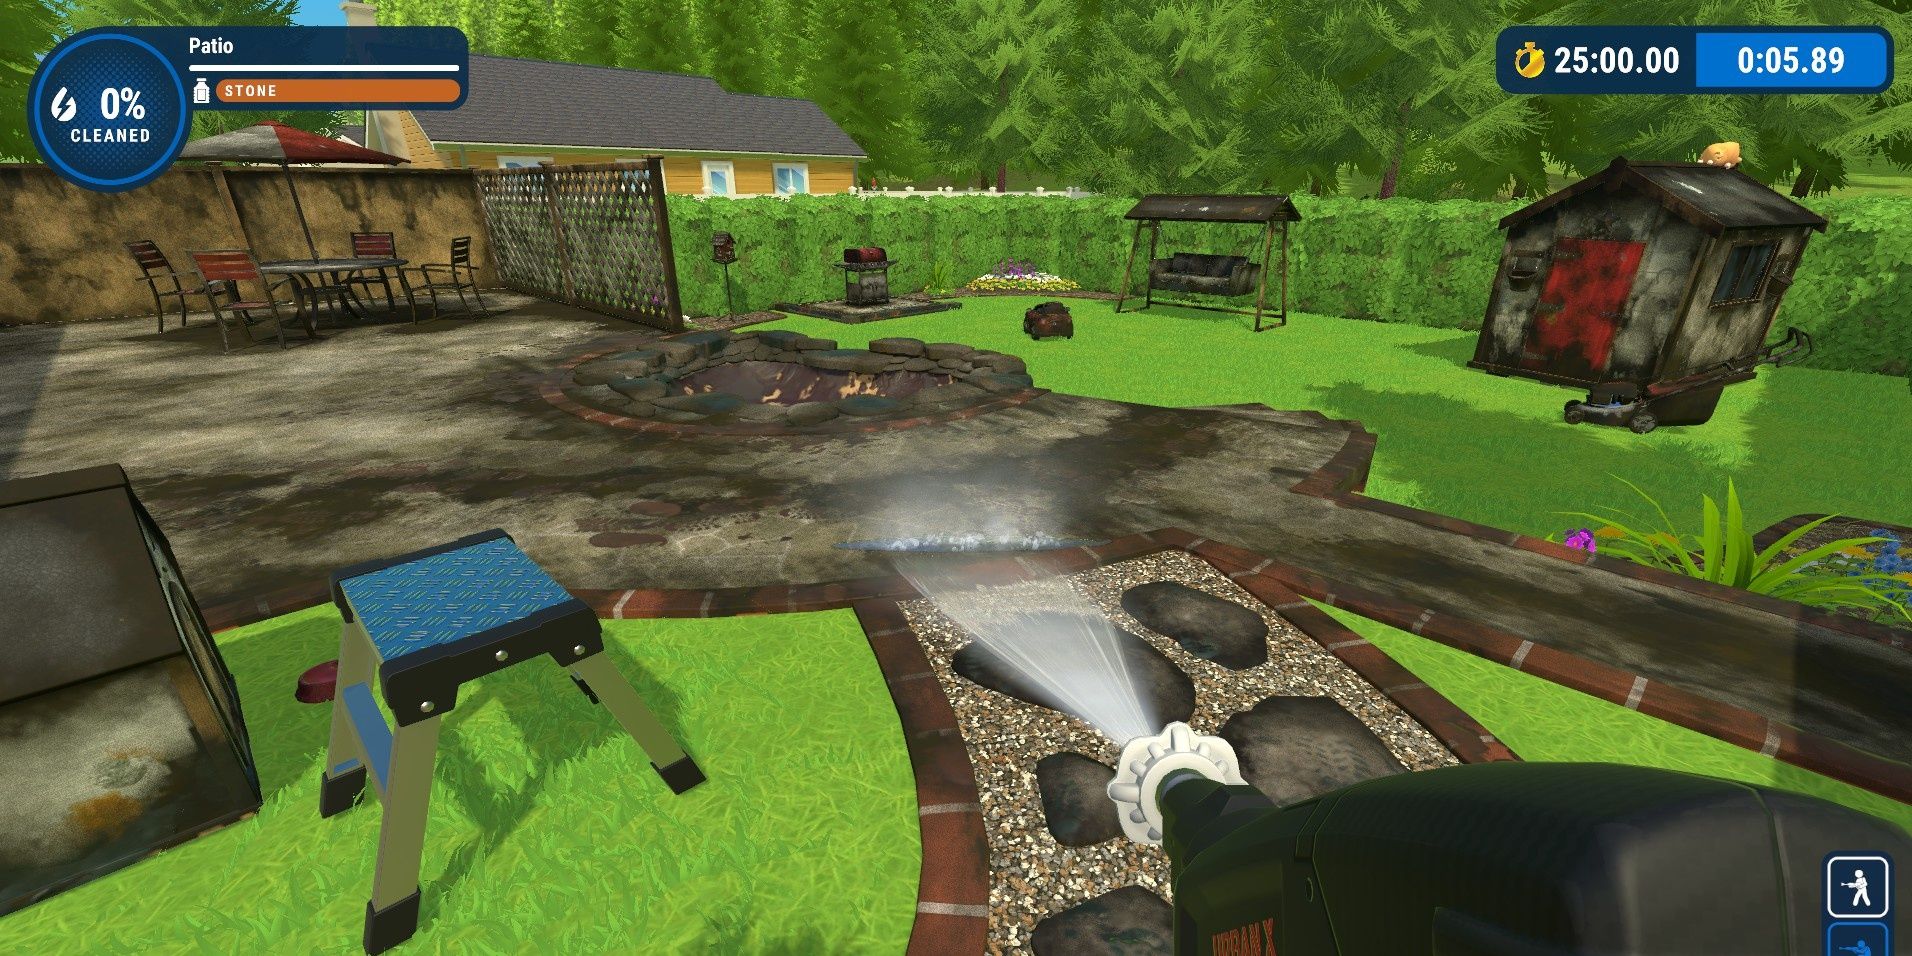 Cleaning the backyard during a time challenge in PowerWash Simulator